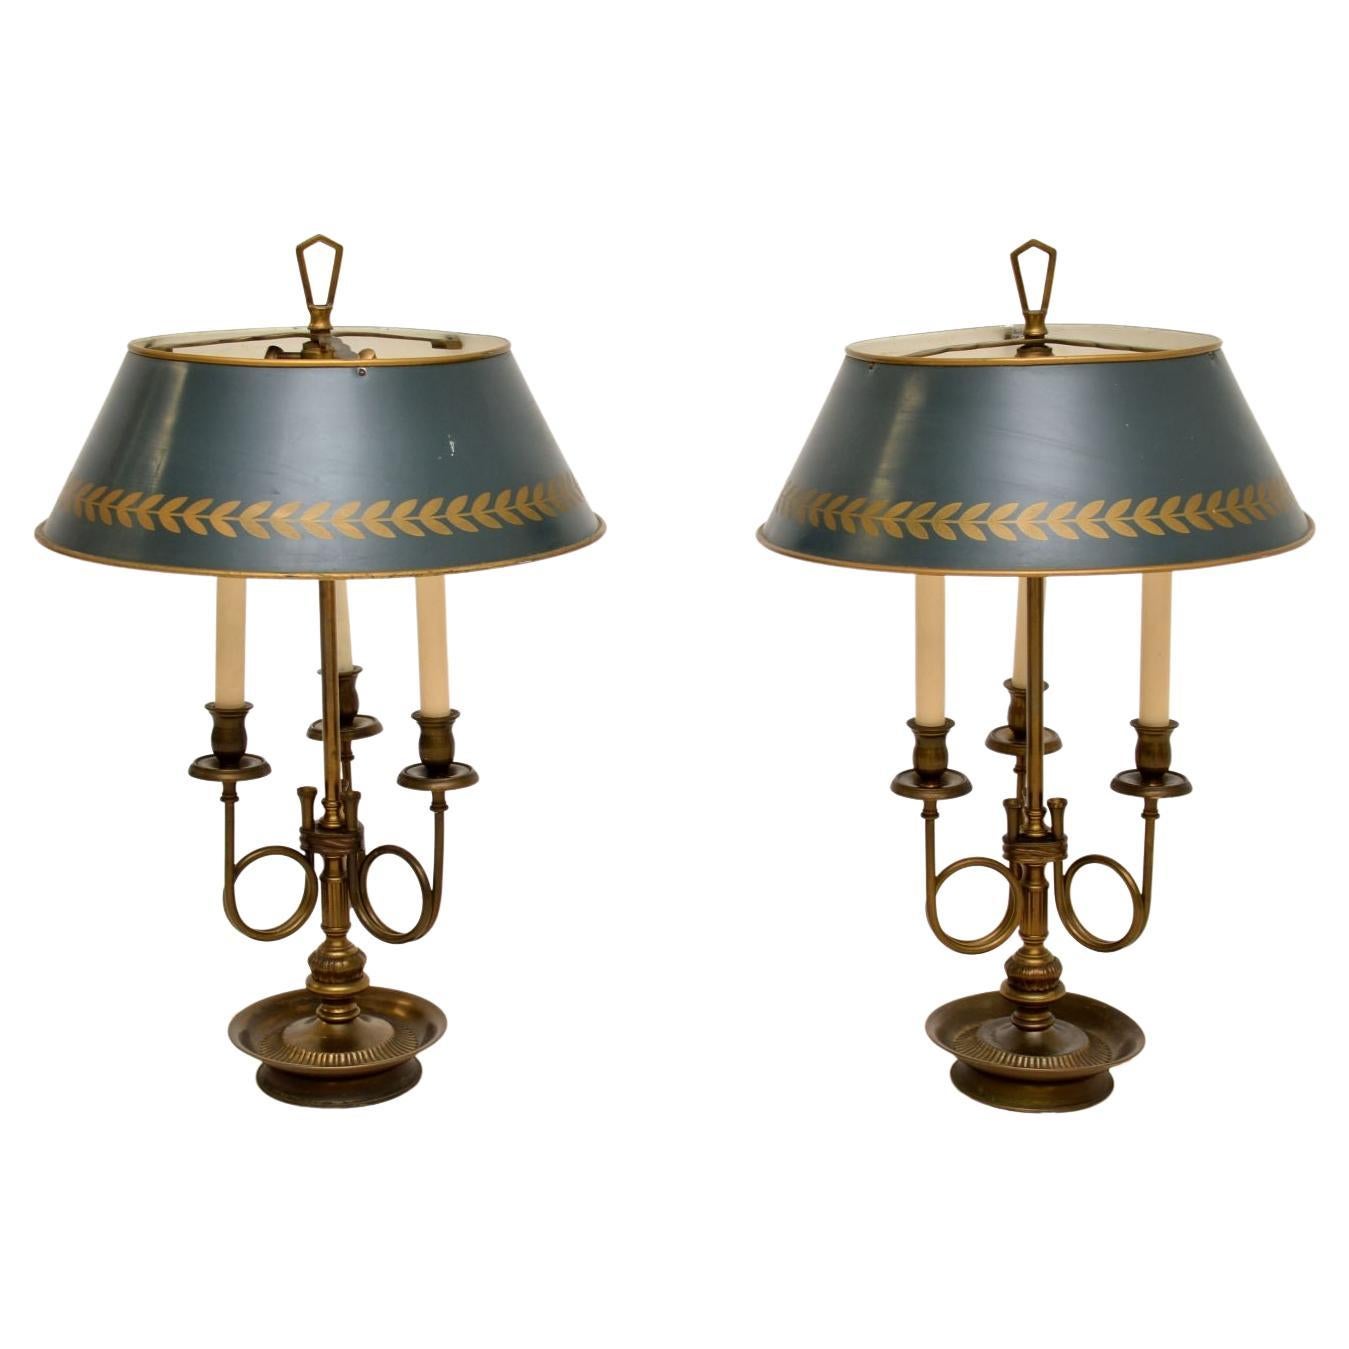 Pair of Antique Brass Table Lamps with Tole Shades